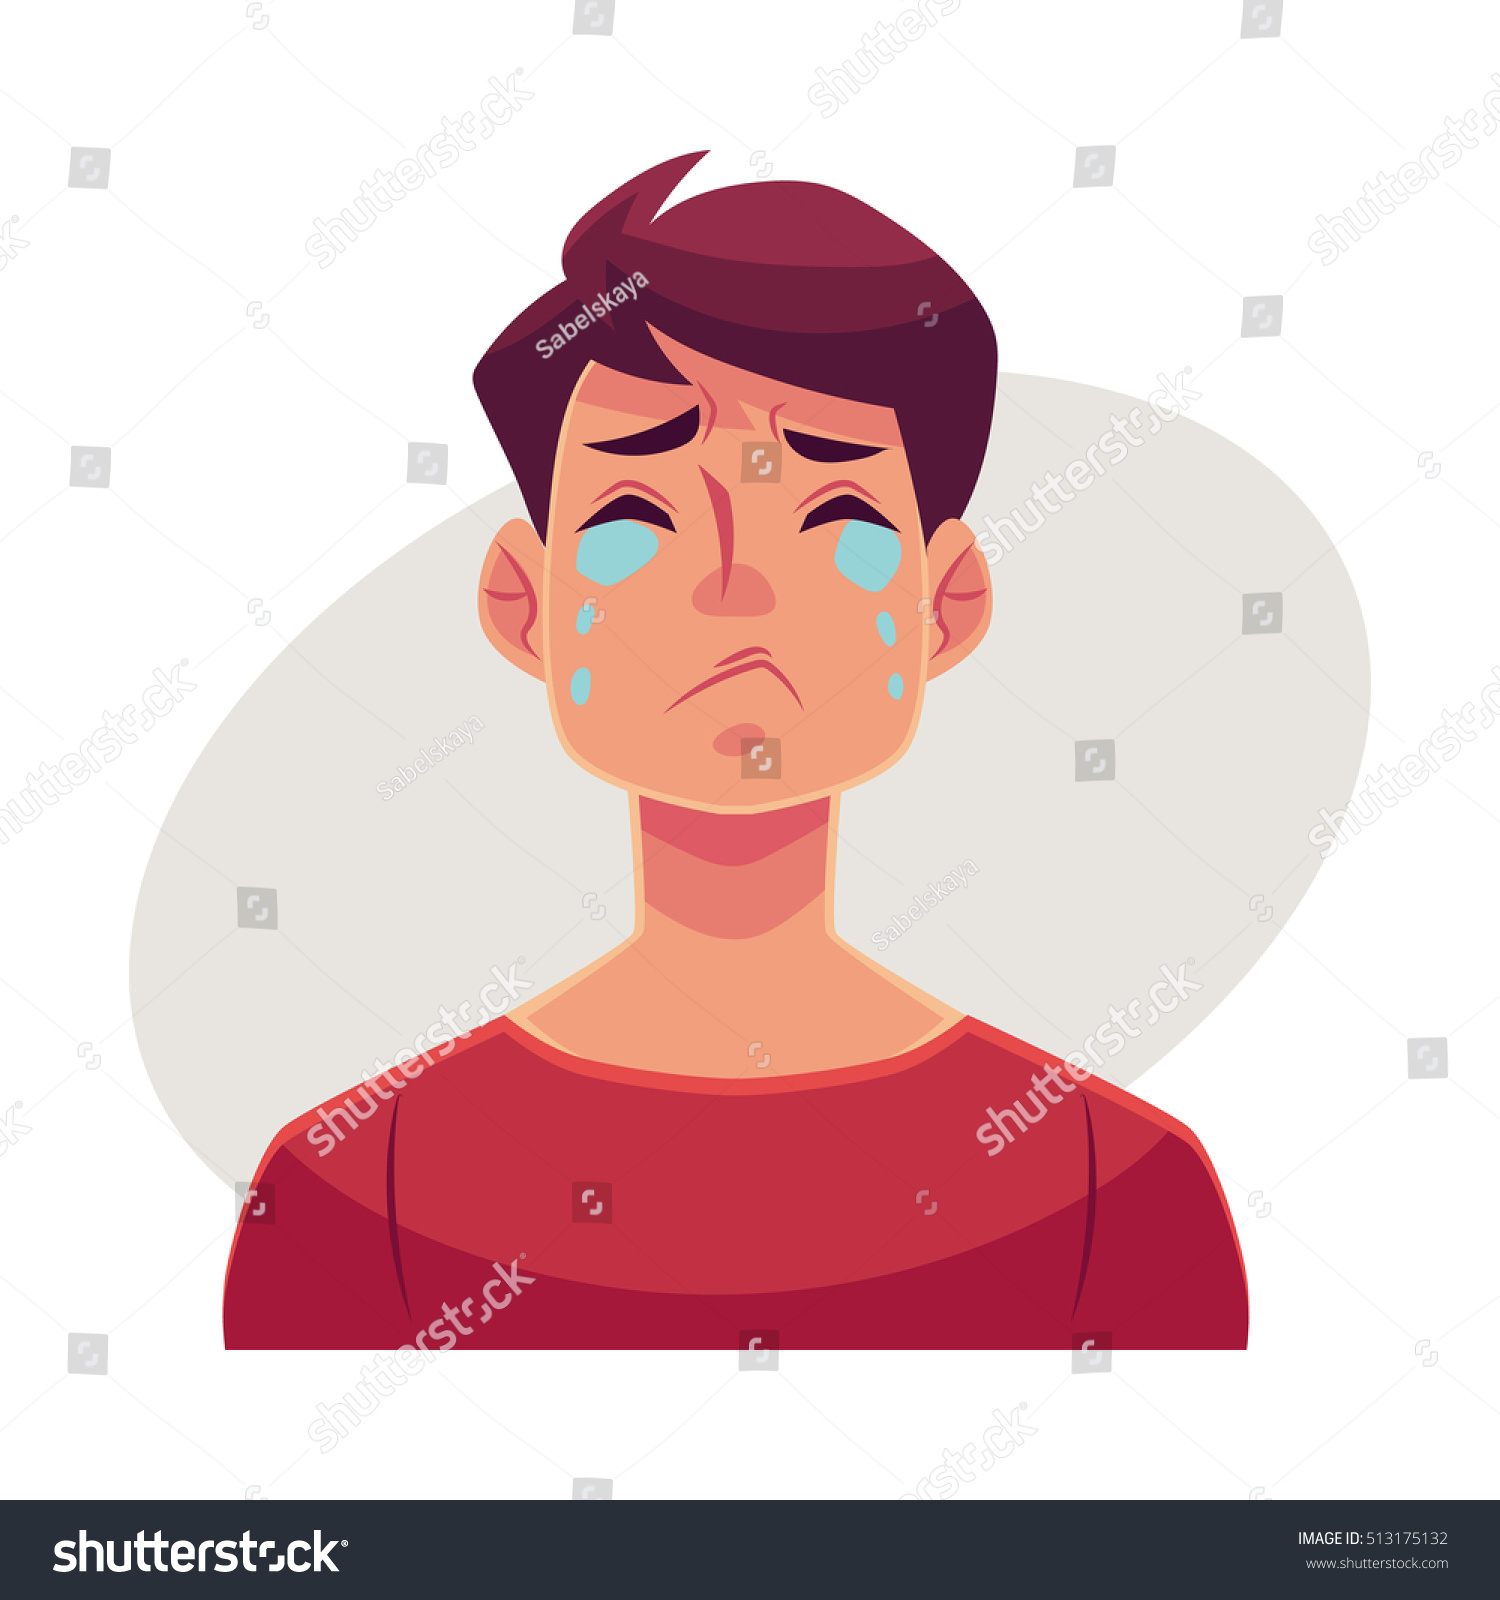 Young man face, crying facial expression, cartoon vector illustrations isolated on gray background. Handsome boy emoji crying, shedding tears, sad, heart broken, in grief. #513175132